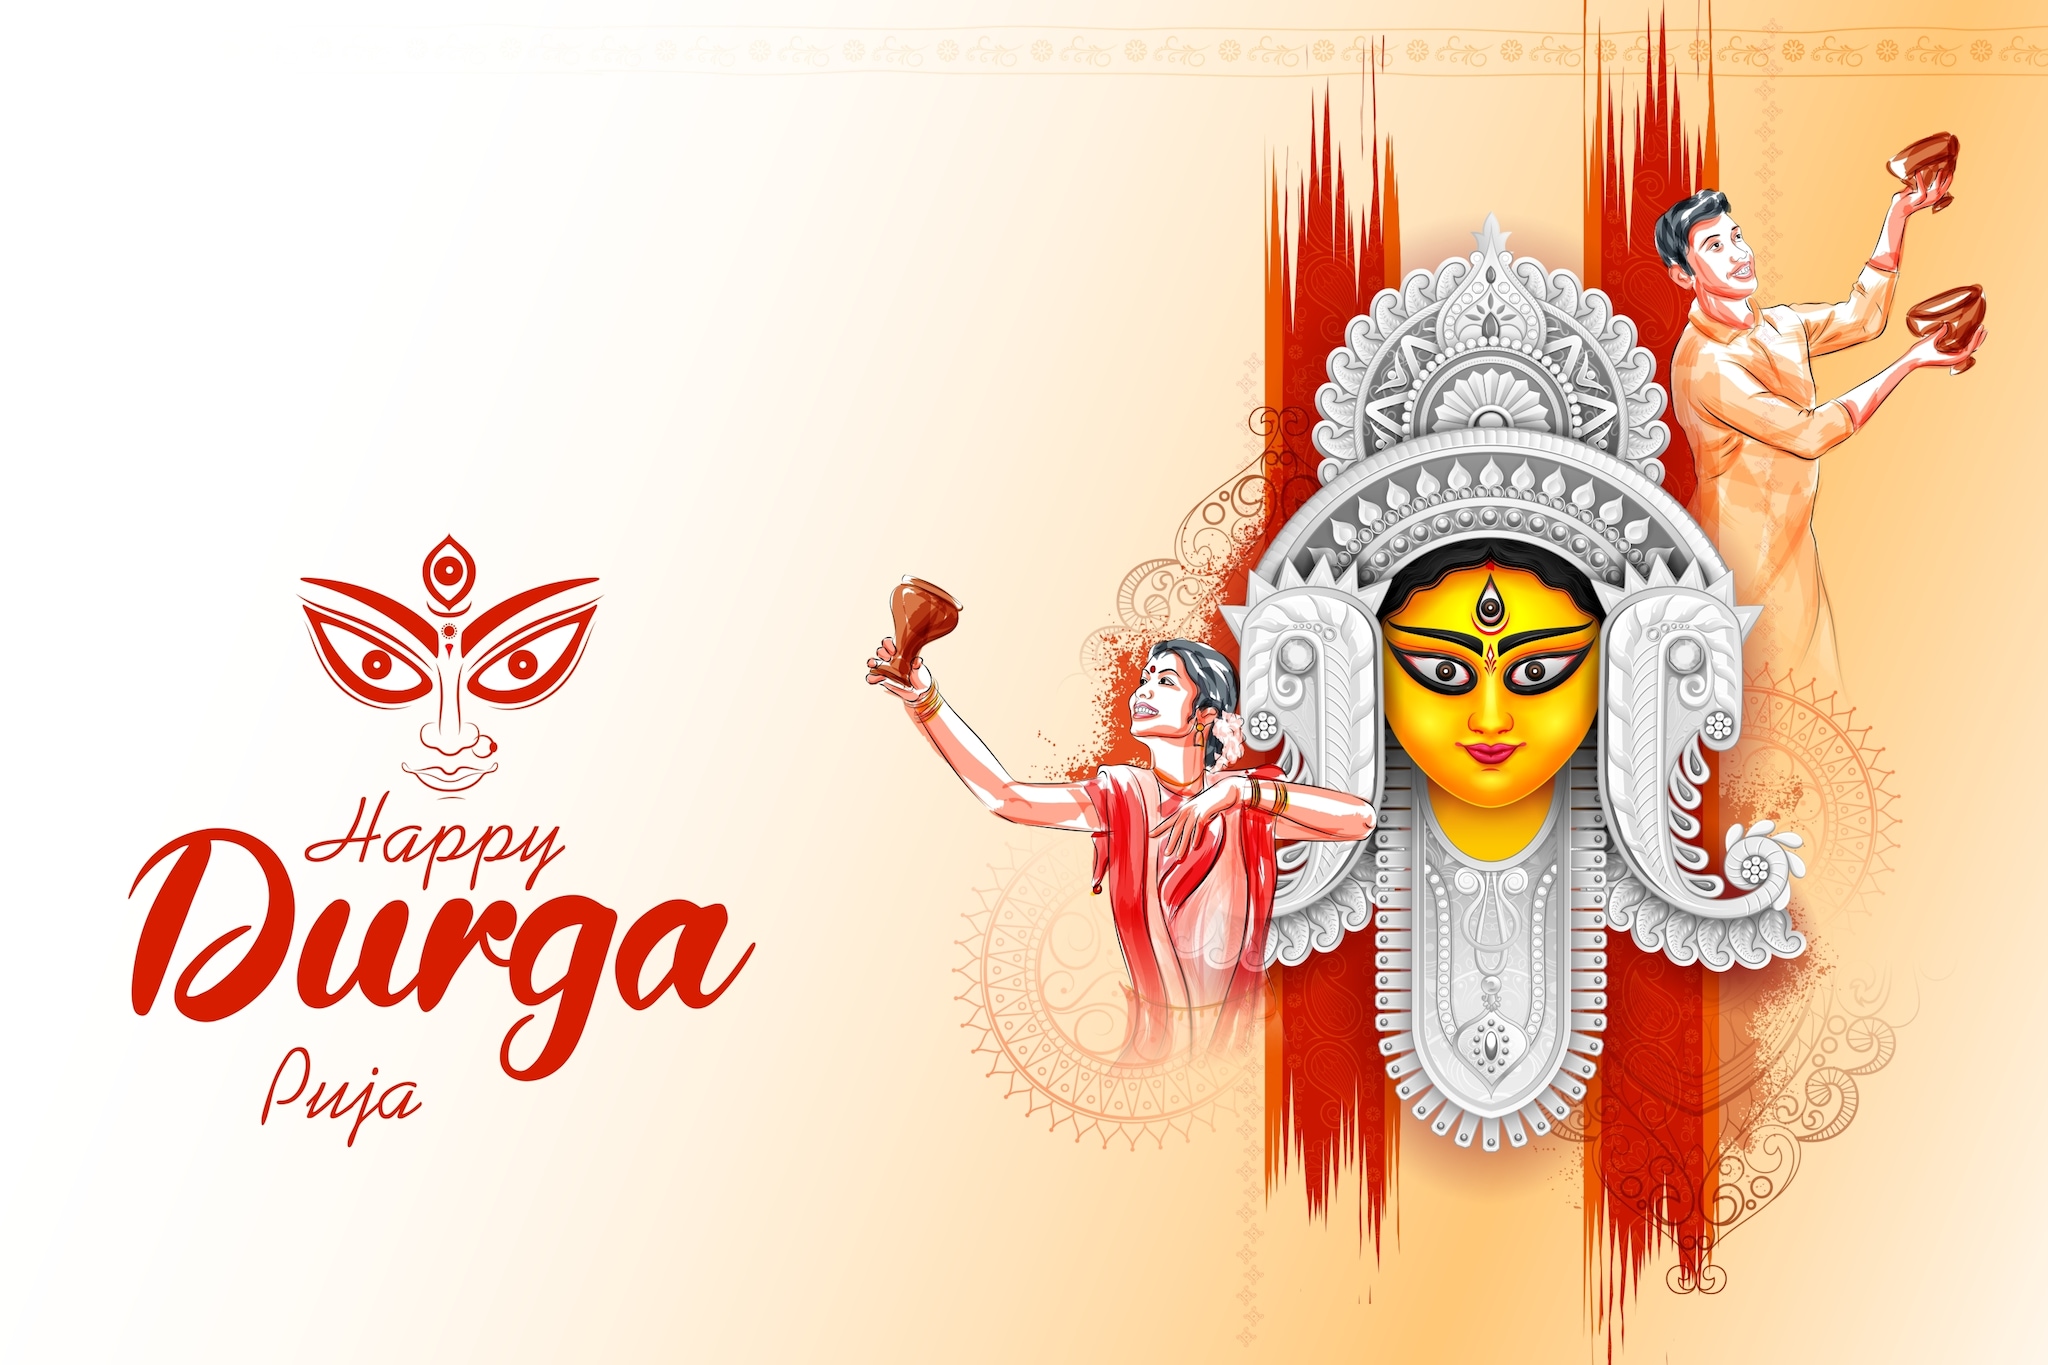 Happy Durga Puja 2021 Images Wishes Quotes Messages And Whatsapp Status To Share With 7026